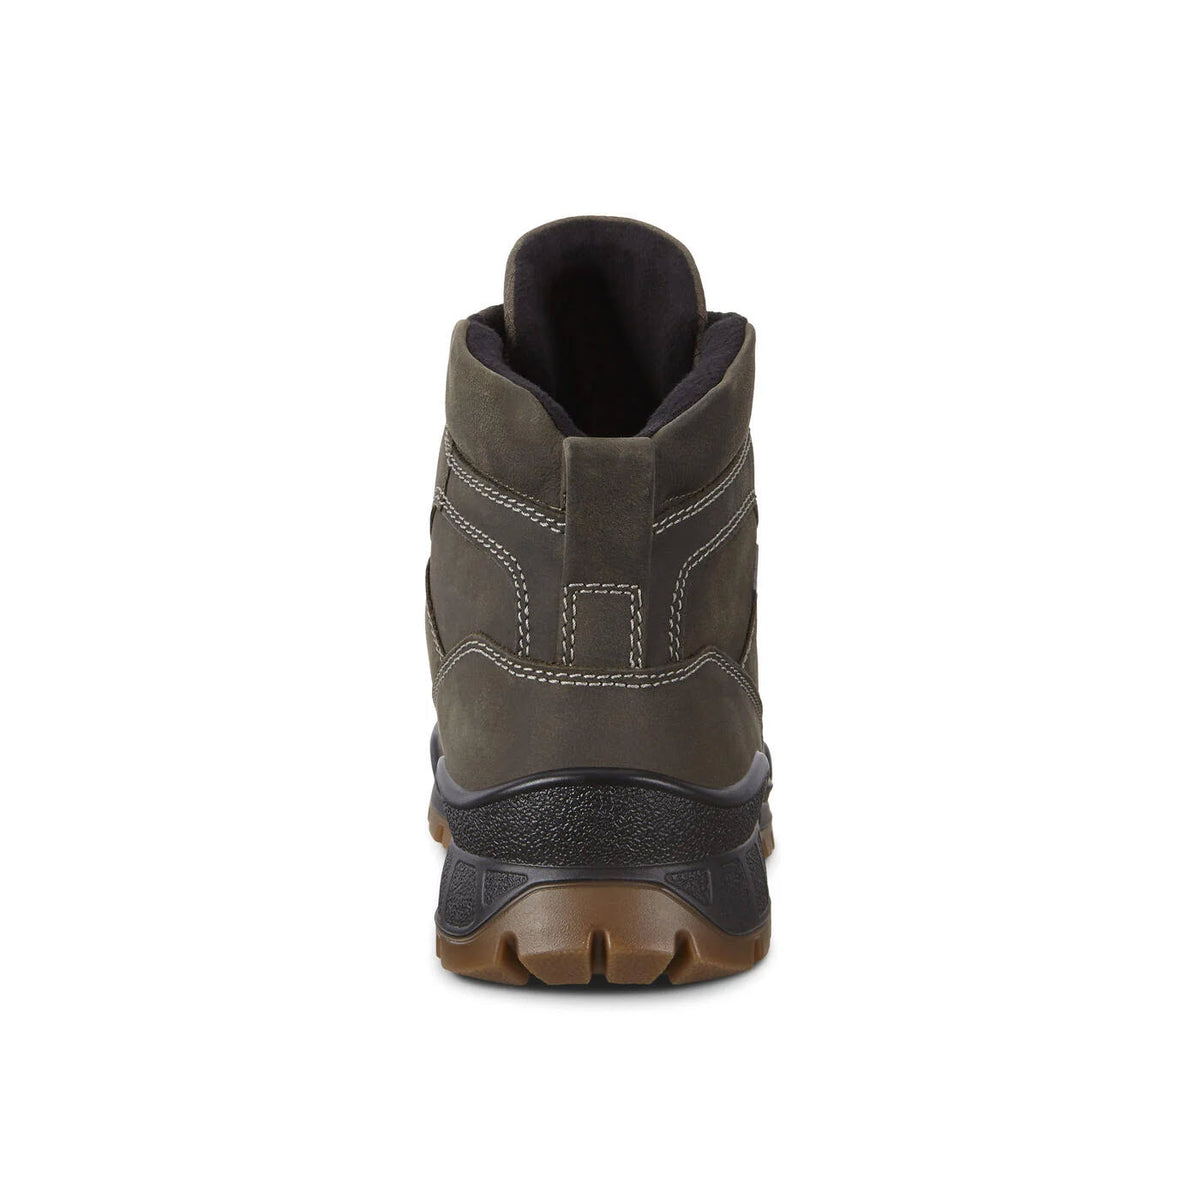 Rear view of a single olive green ECCO TRACK 25 PRIMALOFT BOOT BROWN - MENS hiking boot.